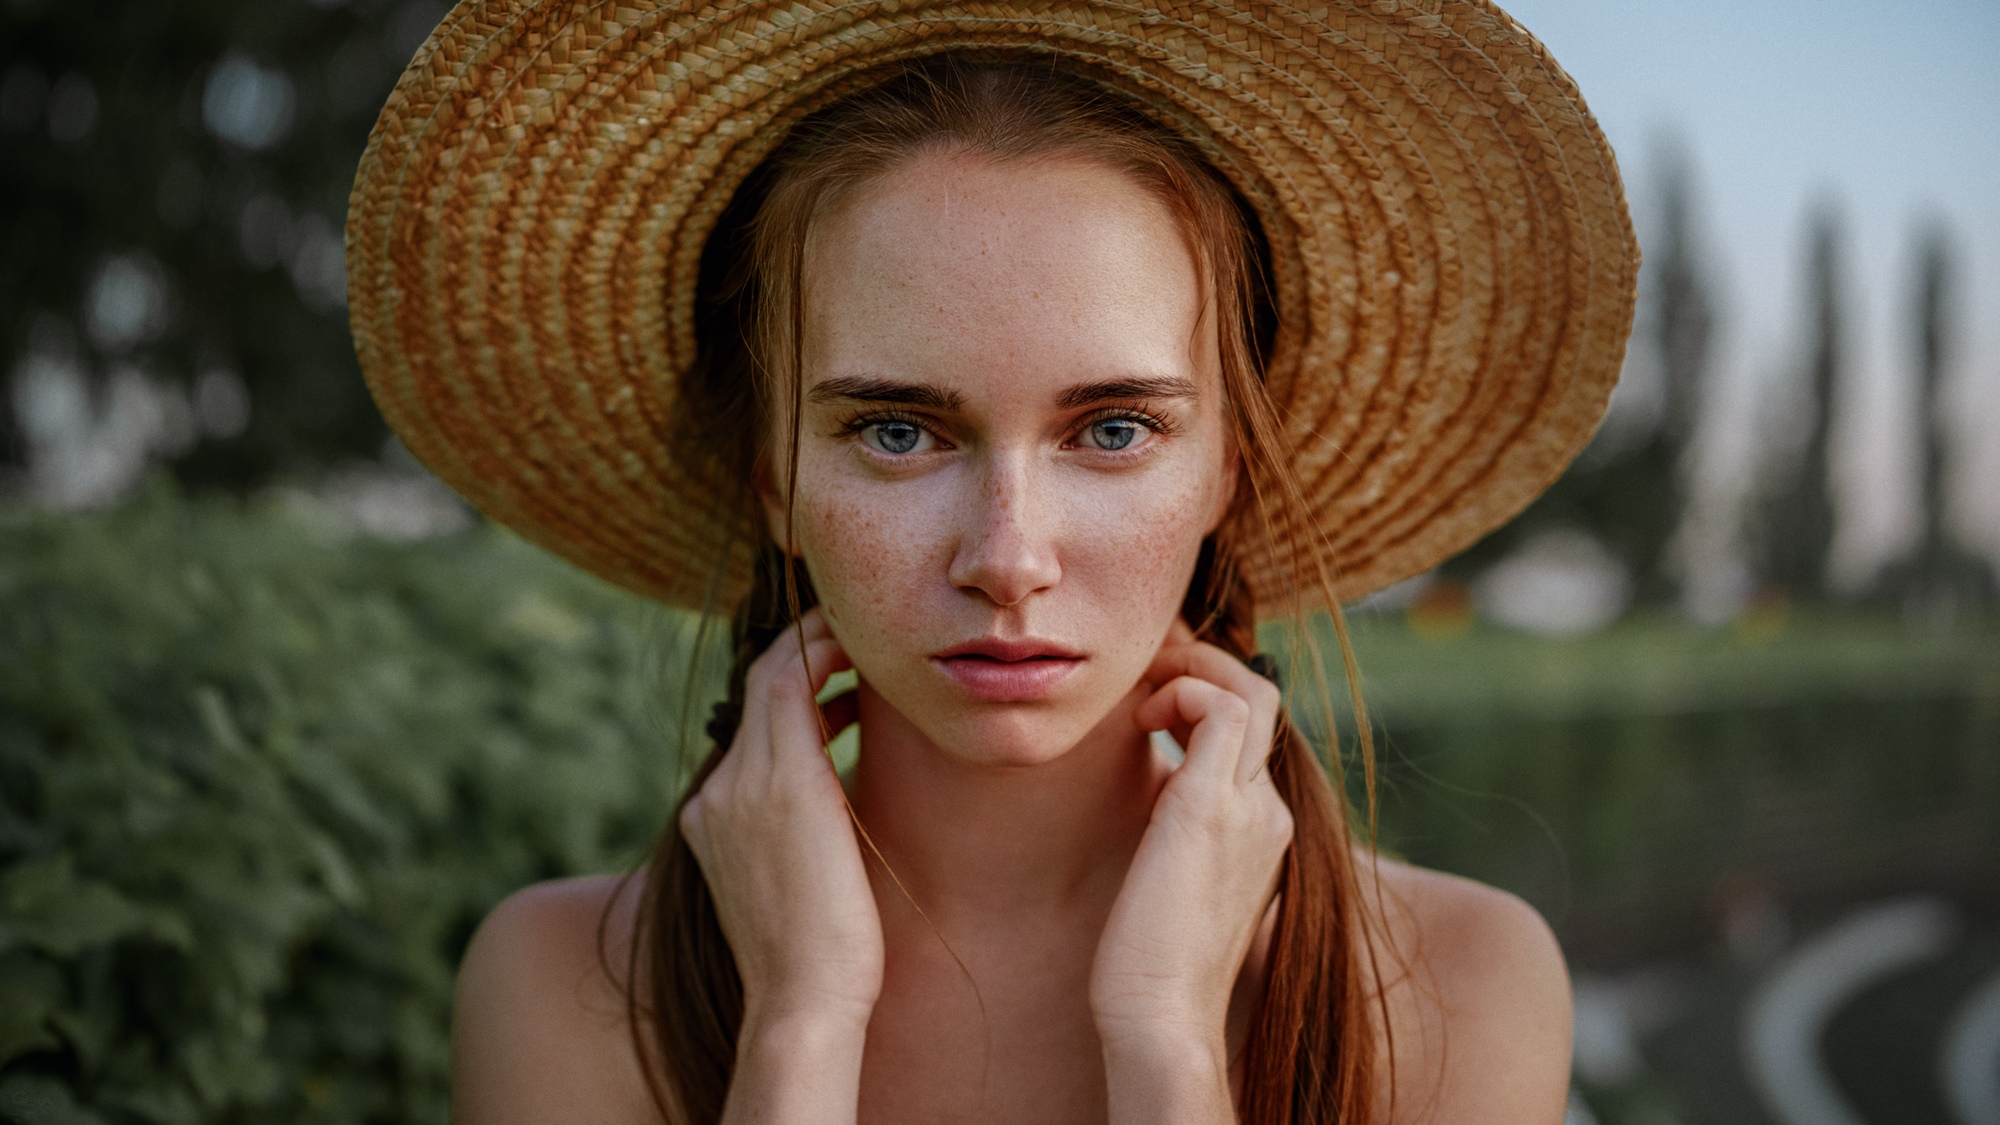 People 2000x1125 women model hat women outdoors face portrait Georgy Chernyadyev Anastasia Nelen depth of field closeup blue eyes brunette twintails freckles thick eyebrows thick eyelashes long eyelashes straw hat long hair curvy bare shoulders braids implied nude